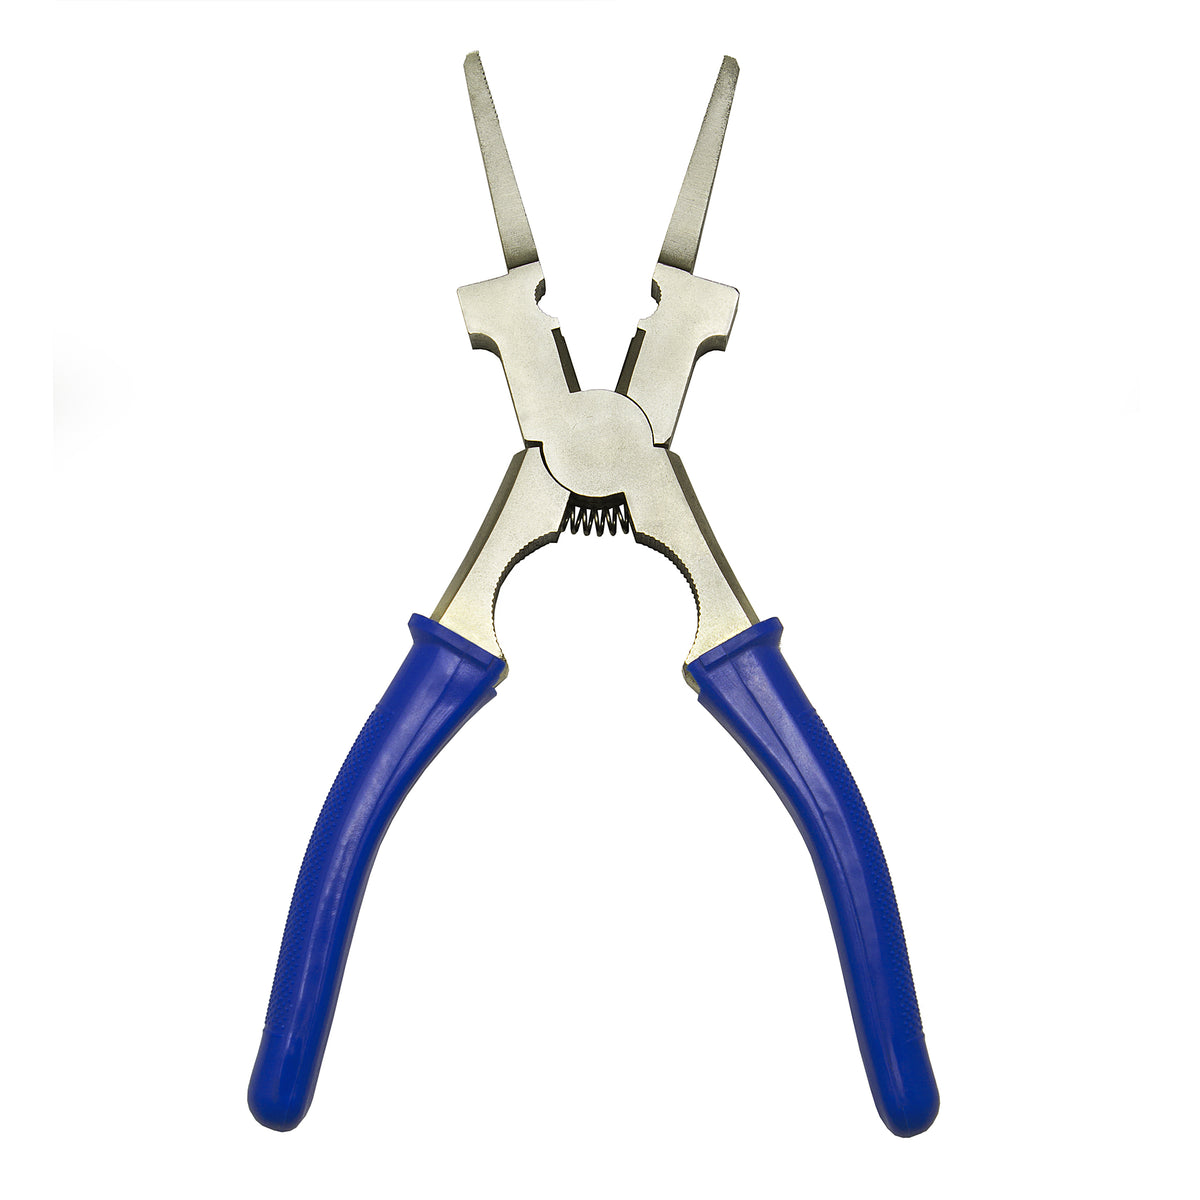 Rounded and Flat Face and Strong Hand Tools Deluxe MIG Welding Pliers 8-Inch 